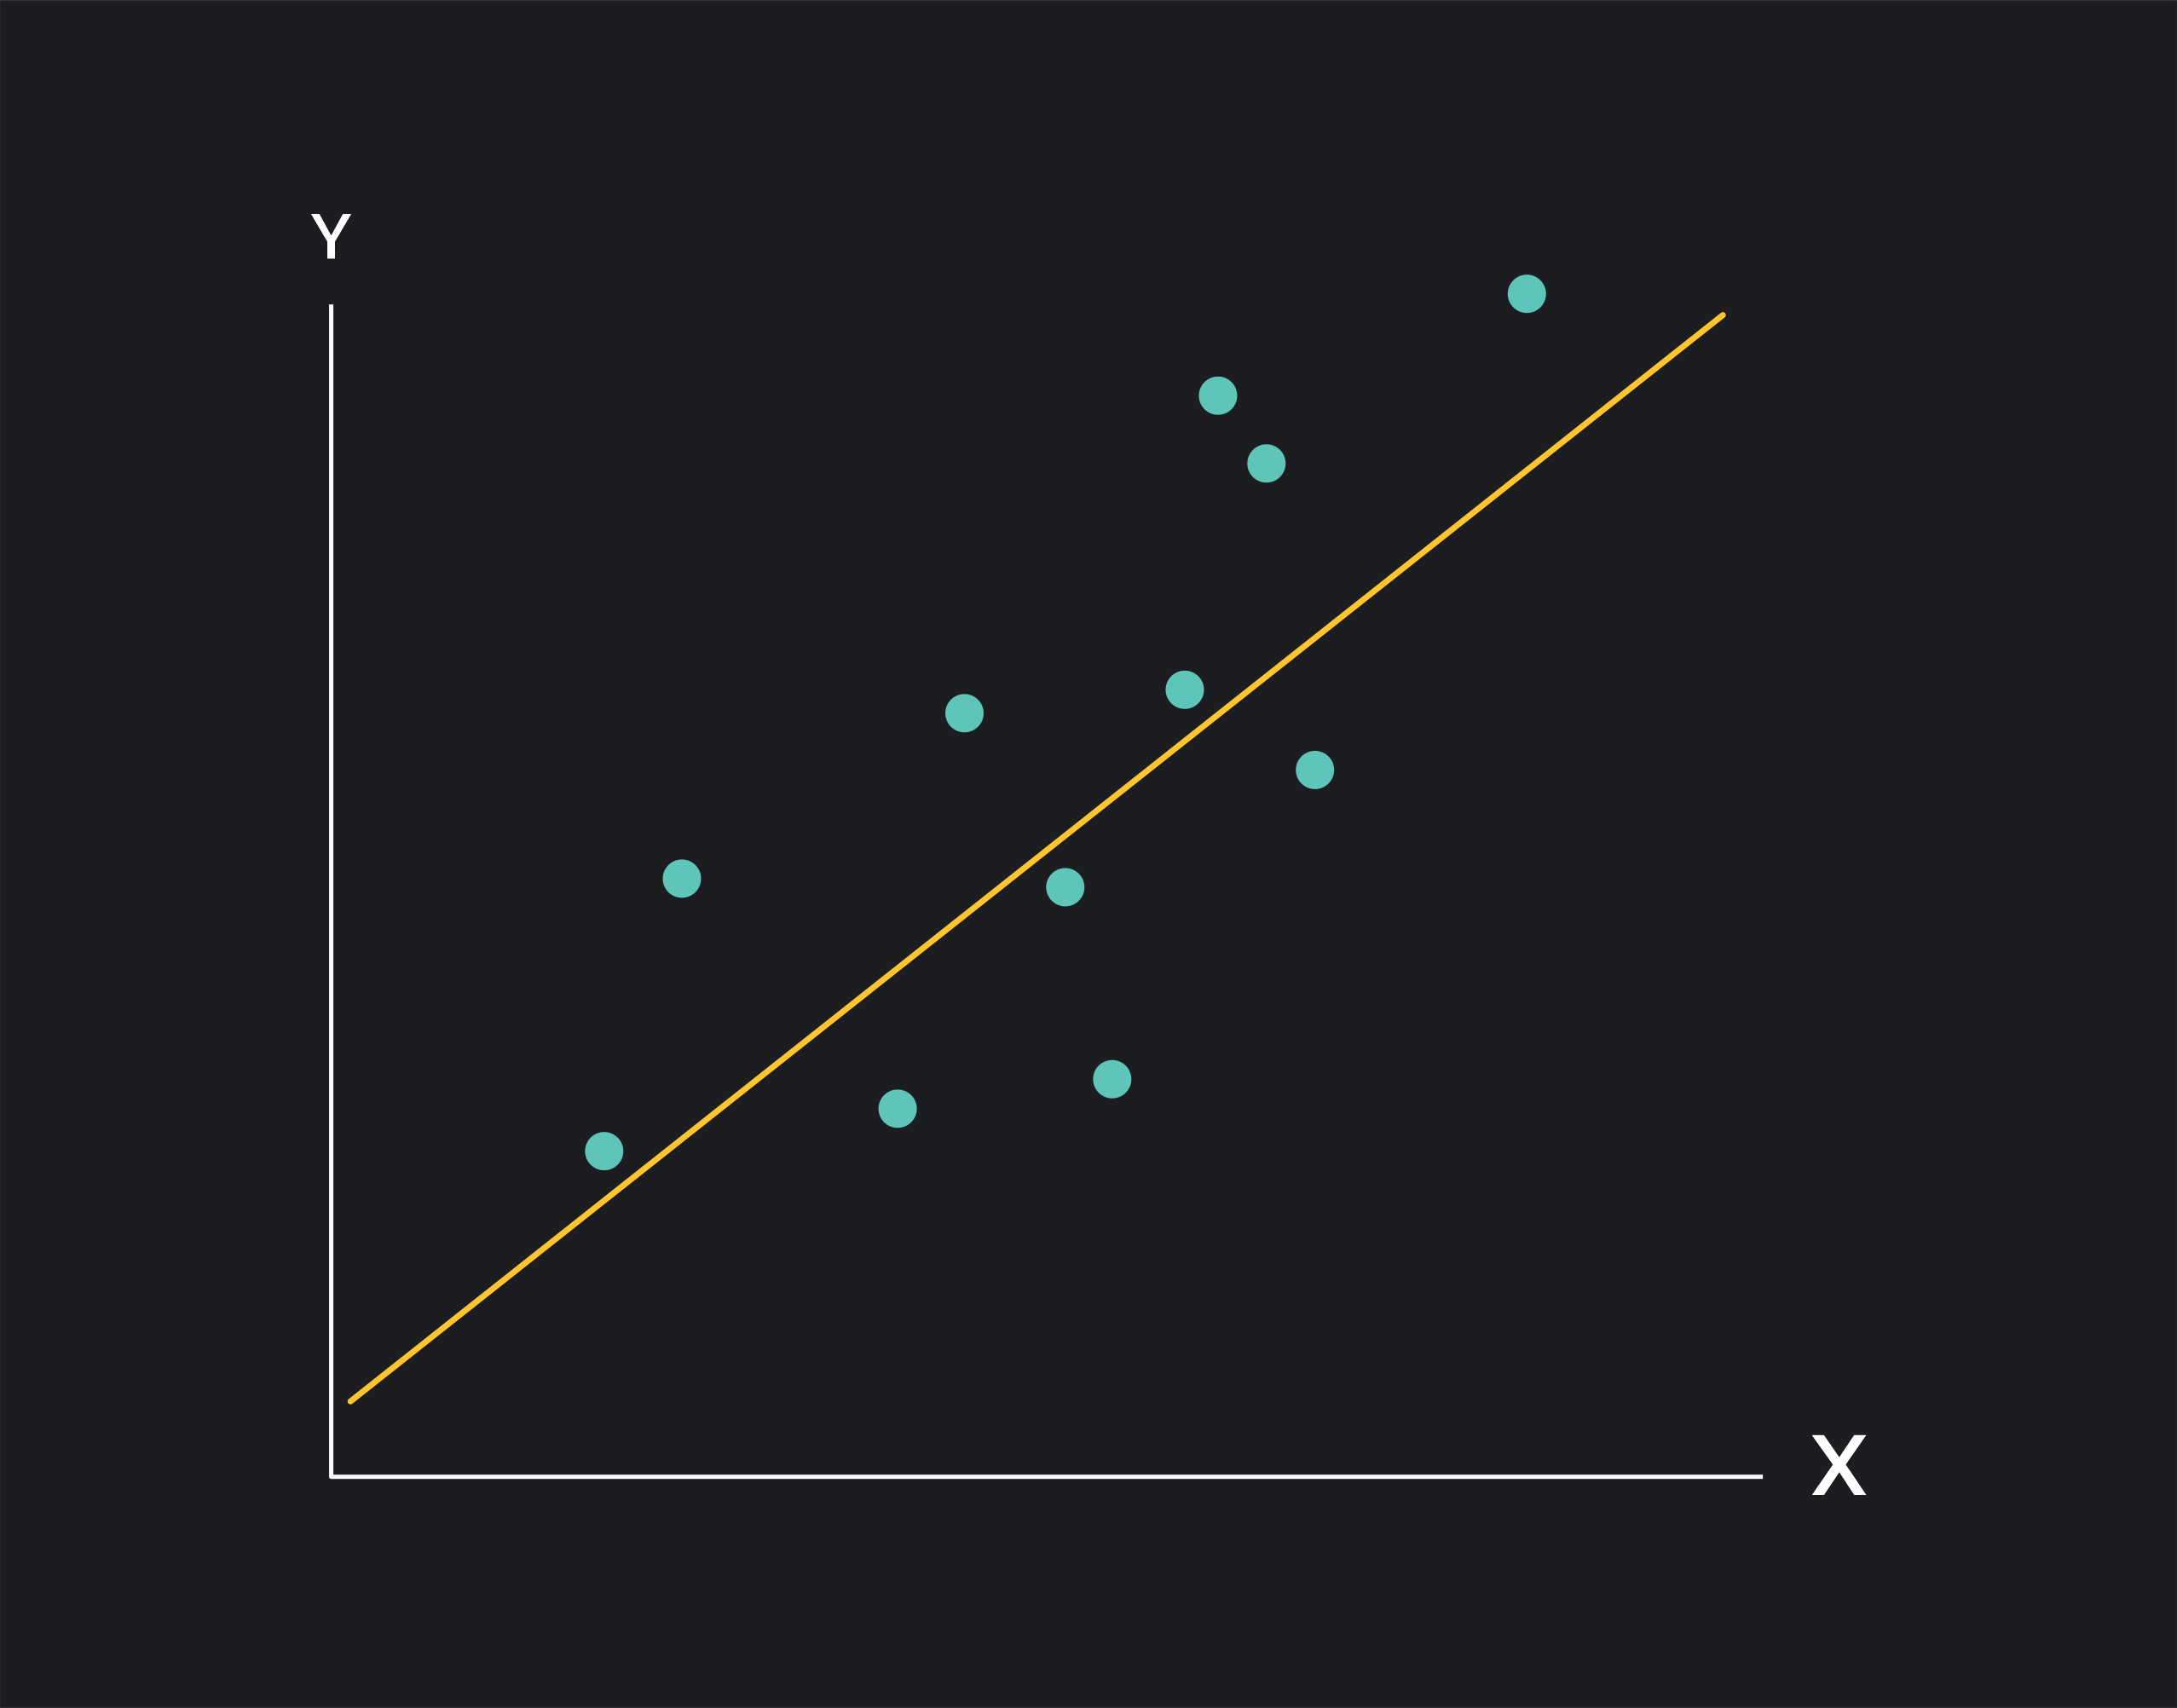 A scatterplot showing the relationship between an independent variable—also called a predictor variable—plotted along the x-axis and the dependent variable 